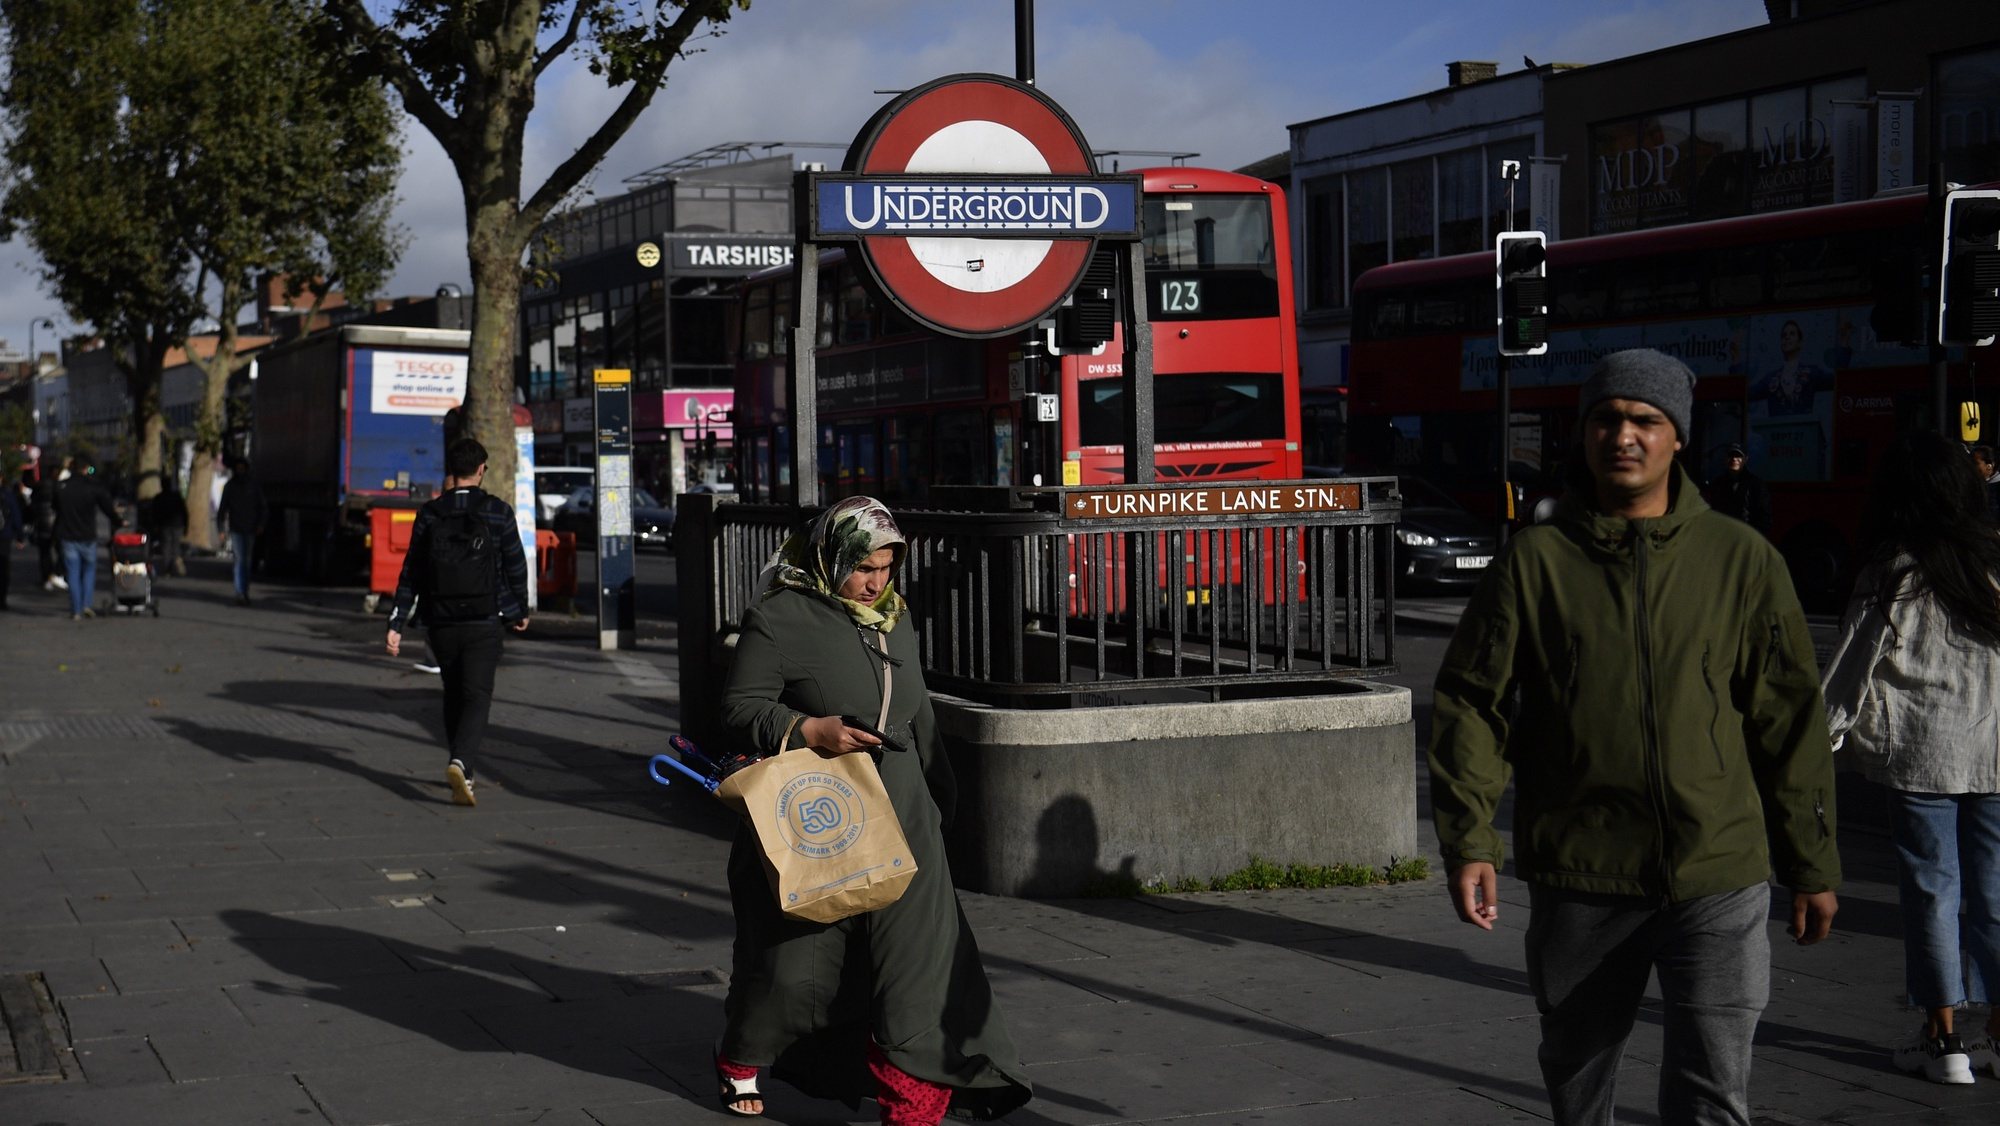 epa07957768 People pass an underground stop on Turnpike Lane in Haringey in London, Britain, 08 October 2019 (issued 29 October 2019). In the 2016 referendum, 75.6% of voters who turned out in the London Borough of Haringey chose to remain. Haringey is made up of some of the wealthiest and poorest areas in the UK. Less than 35% of Haringey is classed as White-British with the rest made up of European, Asian and Caribbean with large communities of Cypriot Greek and Turkish. After several days of discussions, the EU has named 31 January 2020 as the new date for the UK&#039;s withdrawal from the bloc, despite Prime Minister Boris Johnson insisting there would be no further delay beyond 31 October. With his options running out, Johnson has now pushed for a snap election to break the deadlock. Whatever happens, Johnson must achieve what his predecessor, Theresa May, found impossible: getting the deal through a bitterly divided House of Commons. The parliamentary rift, which has left the House at an impasse, illustrates the deep divide across much of the country since the UK chose to leave the EU. In the three years since the vote, British politicians have struggled to reach any sort of consensus on the most pressing issues surrounding Brexit. But political considerations aside, perhaps the biggest challenge facing the country is how to bridge the divide that has left the United Kingdom more disunited than ever.  EPA/NEIL HALL ATTENTION: This Image is part of a PHOTO SET